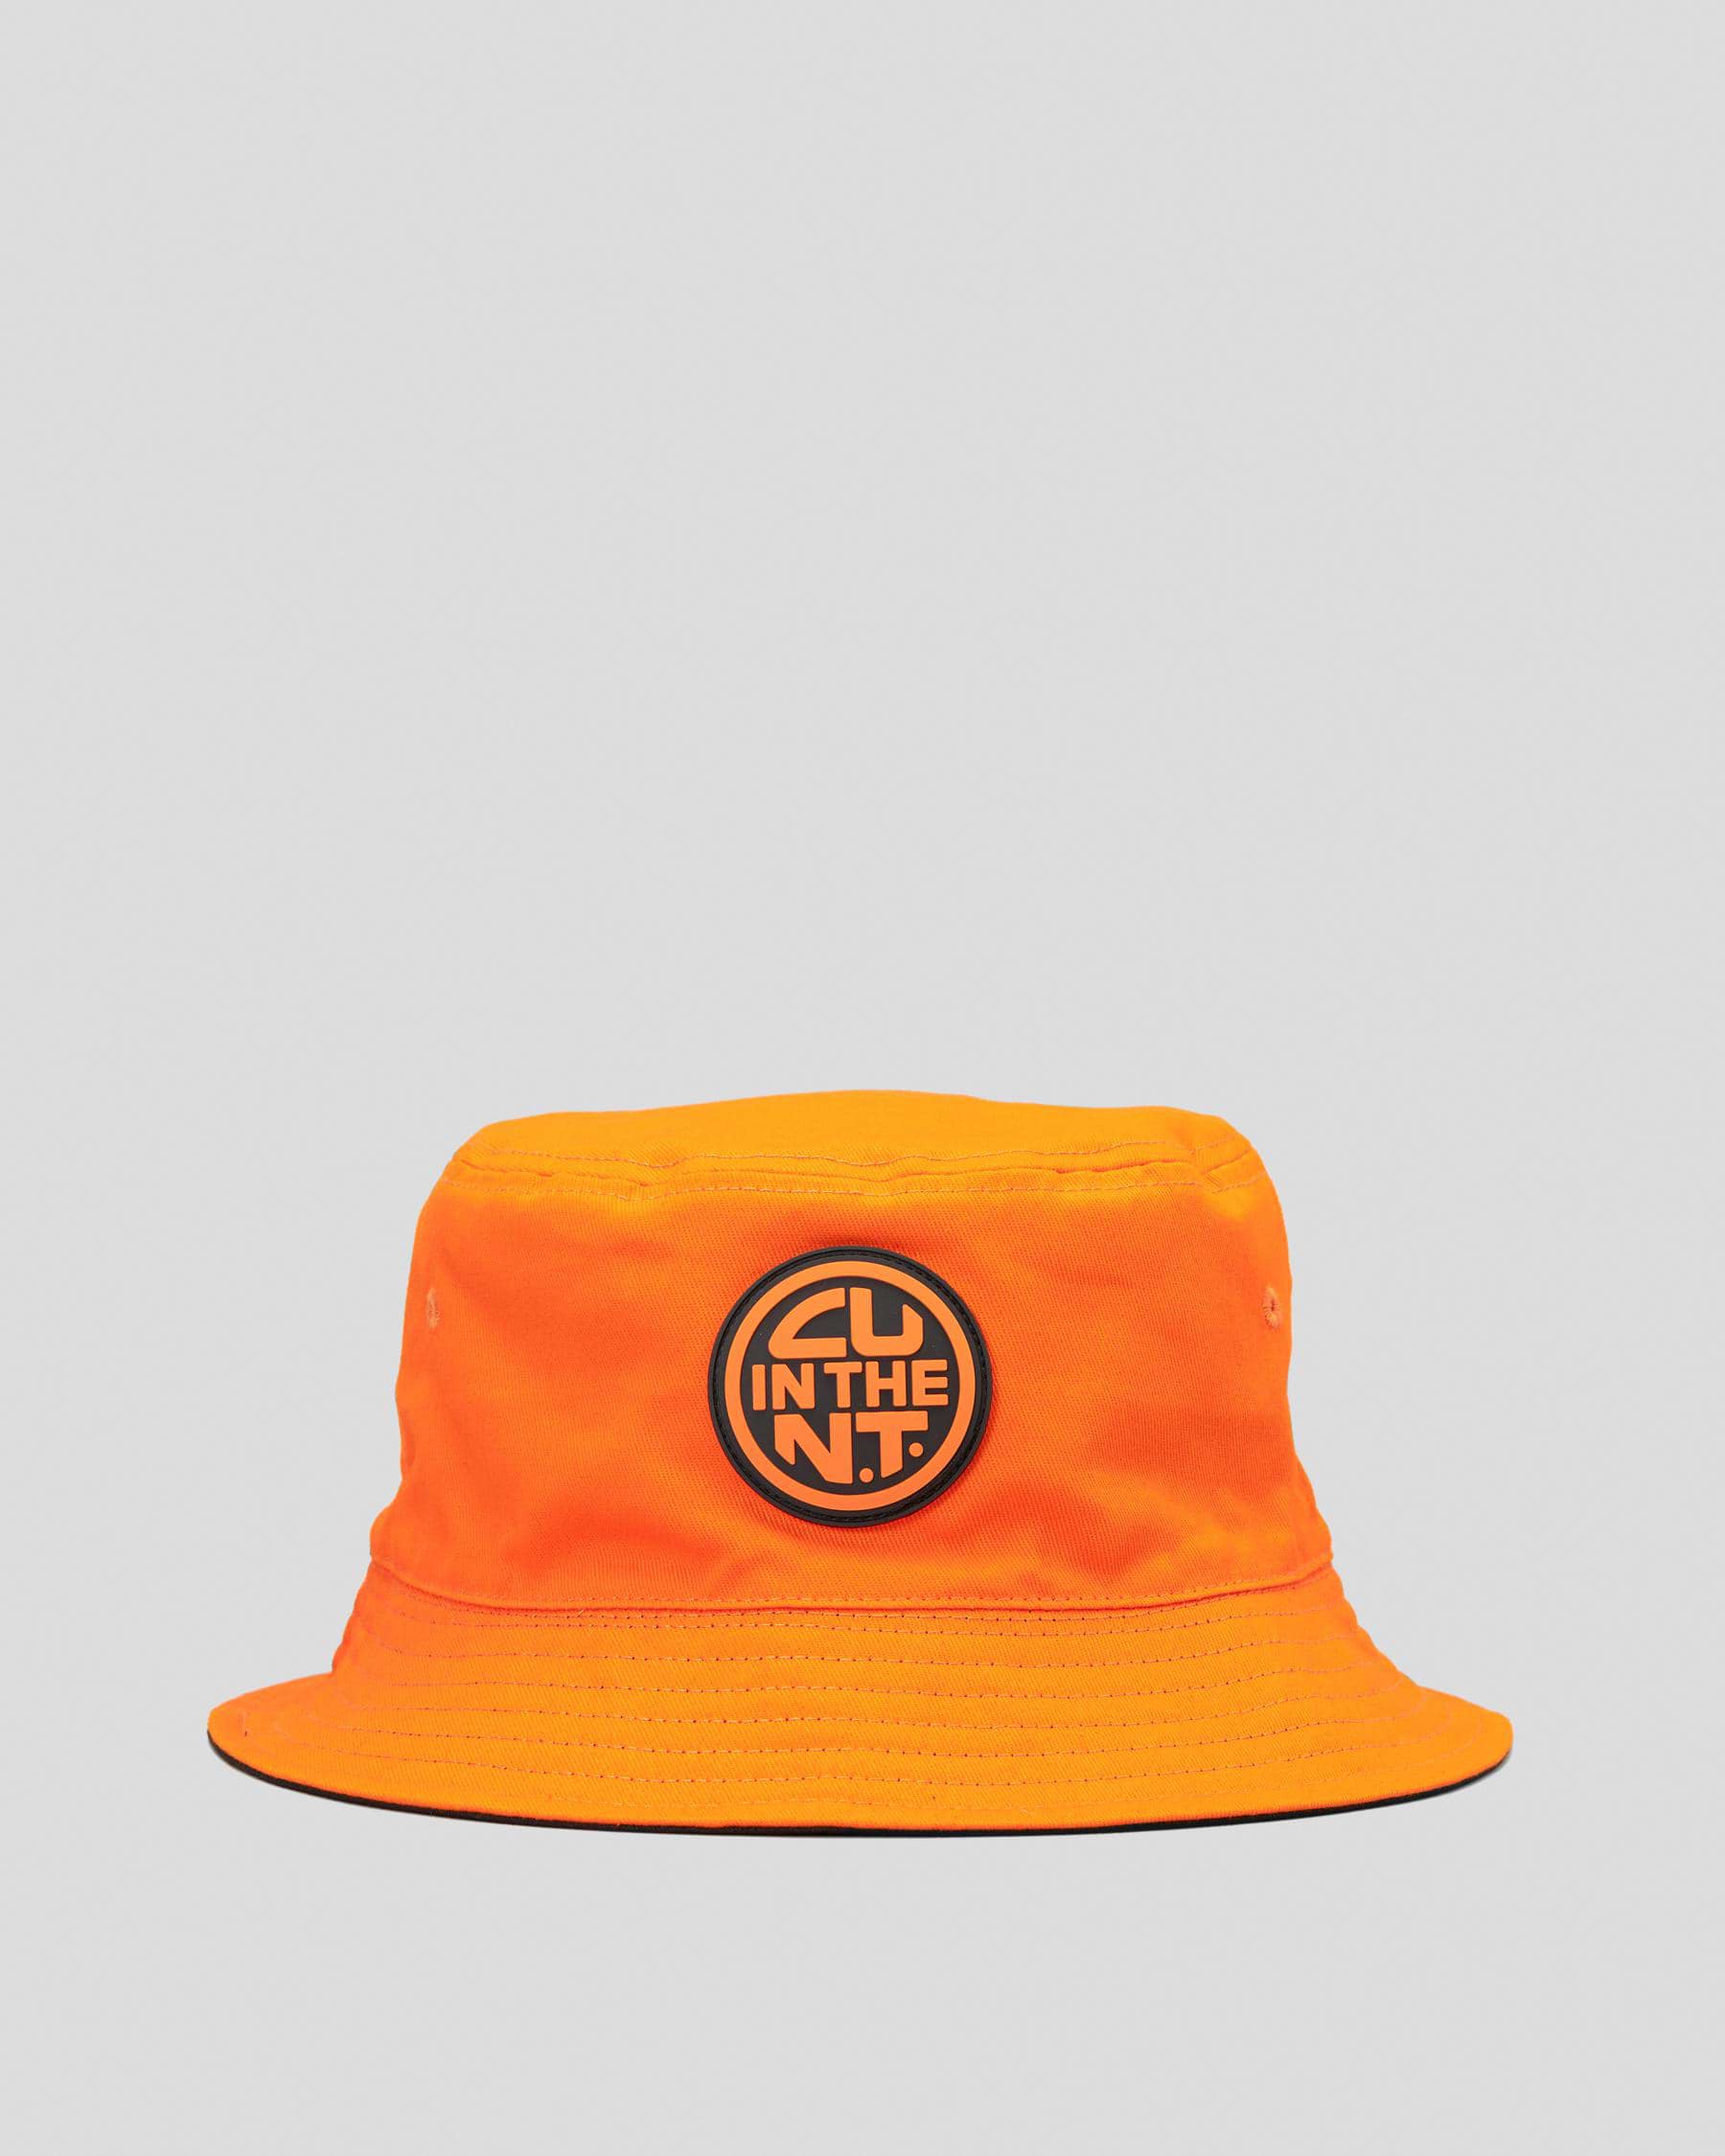 CU in the NT Explorer Reversible Bucket Hat In Orange - Fast Shipping ...